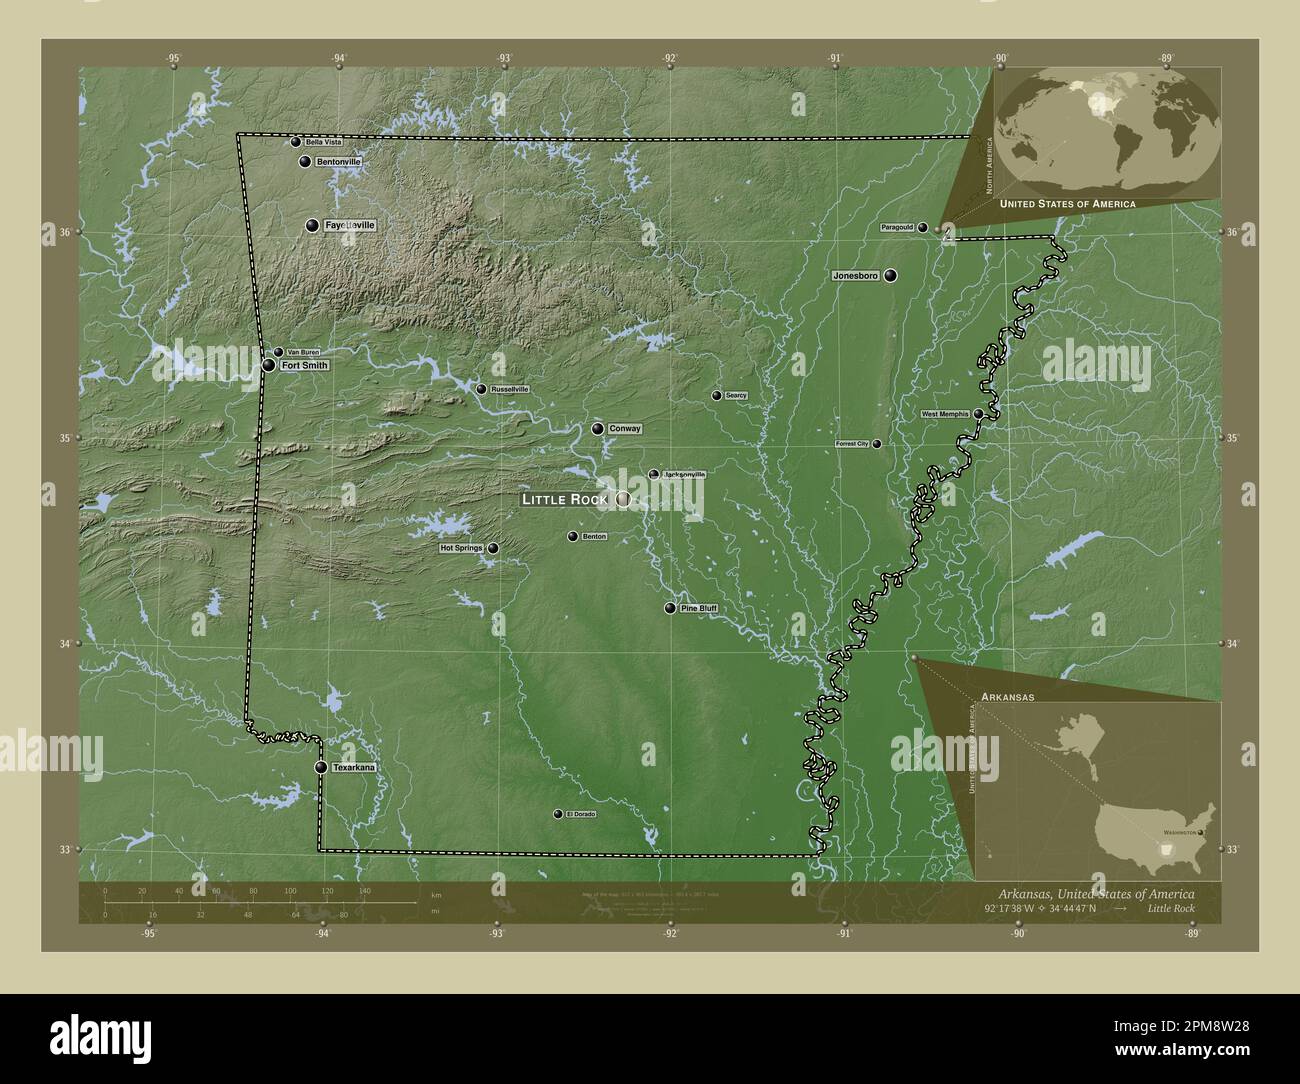 Arkansas, state of United States of America. Elevation map colored in wiki style with lakes and rivers. Locations and names of major cities of the reg Stock Photo